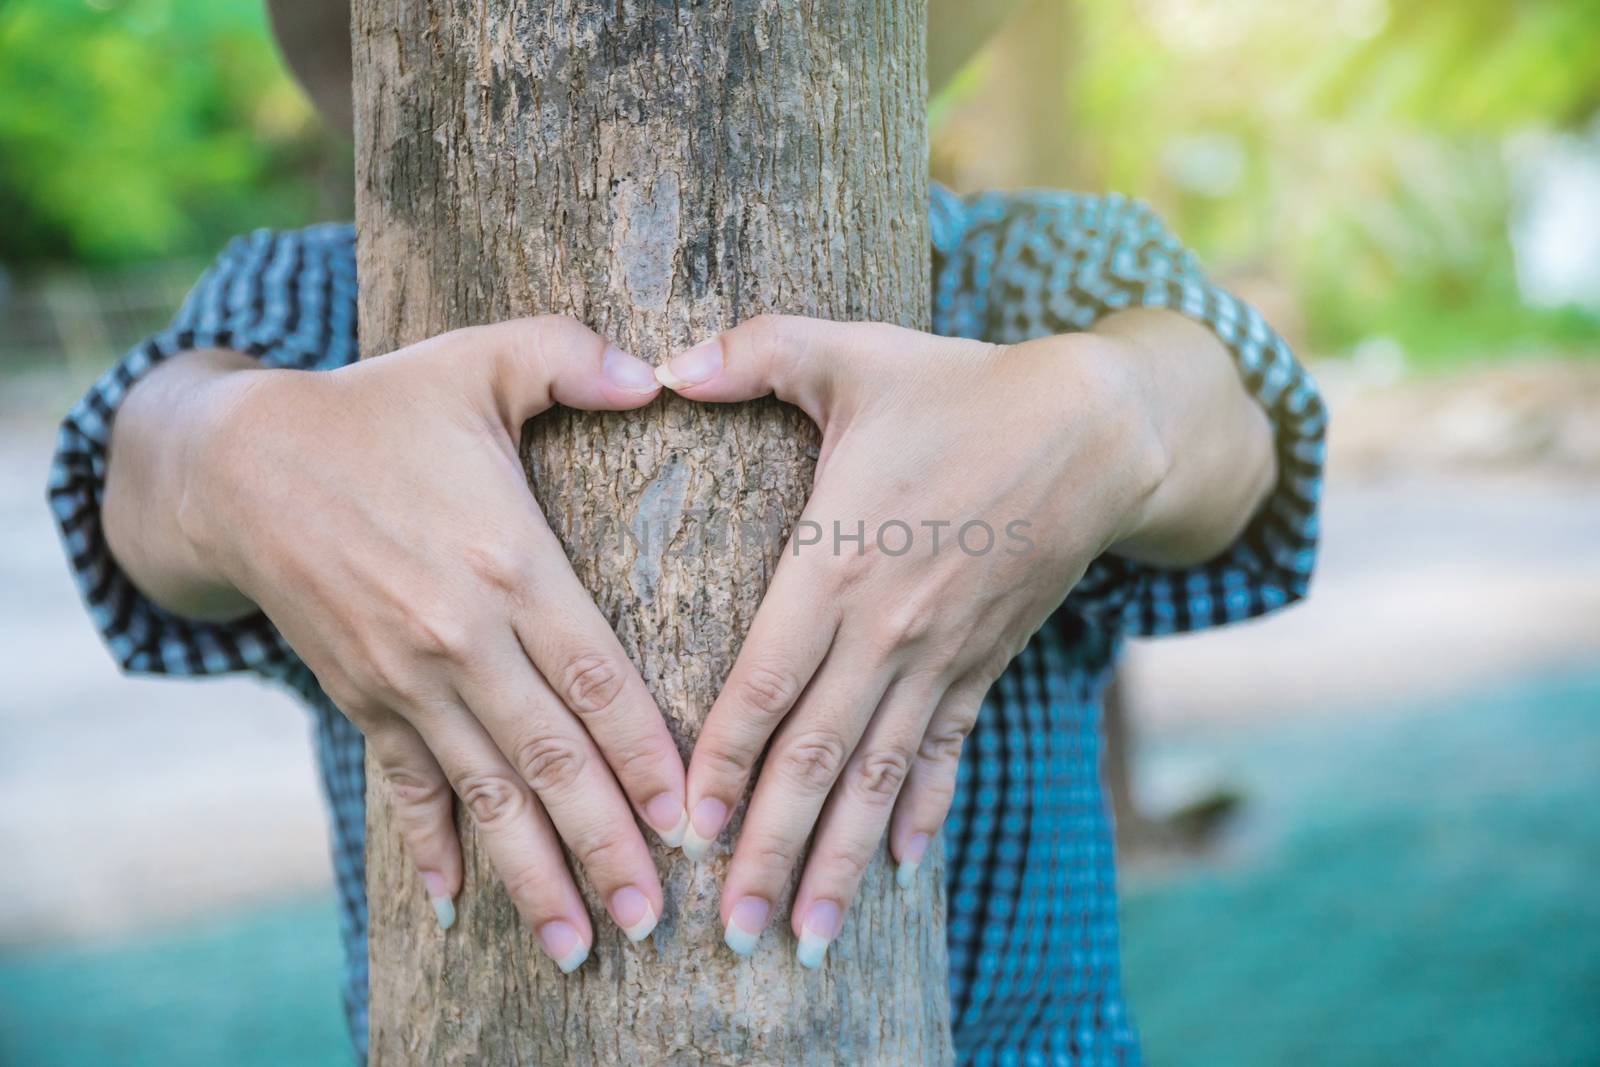 A rural woman made a heart-shaped hand to show love for the tree.